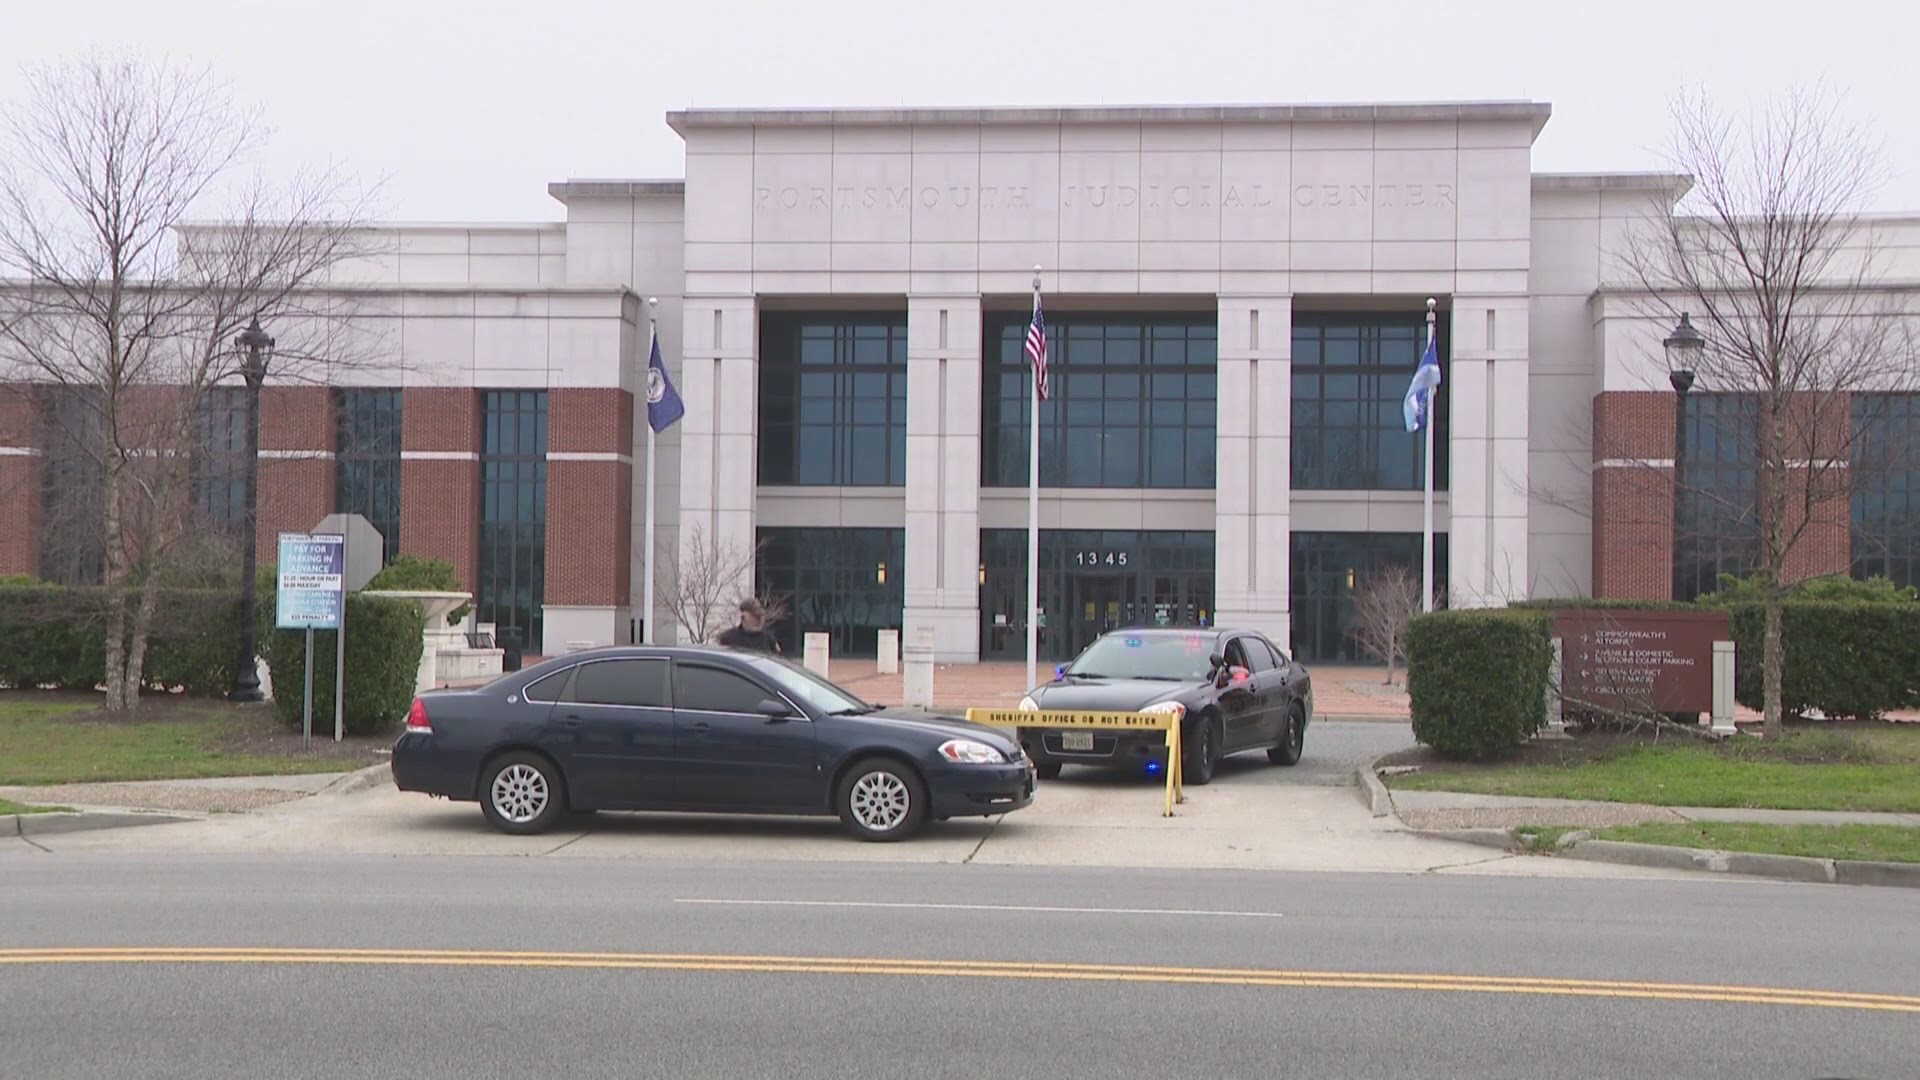 Portsmouth authorities closed off the entrance to the city courthouse after a bomb threat Tuesday morning.